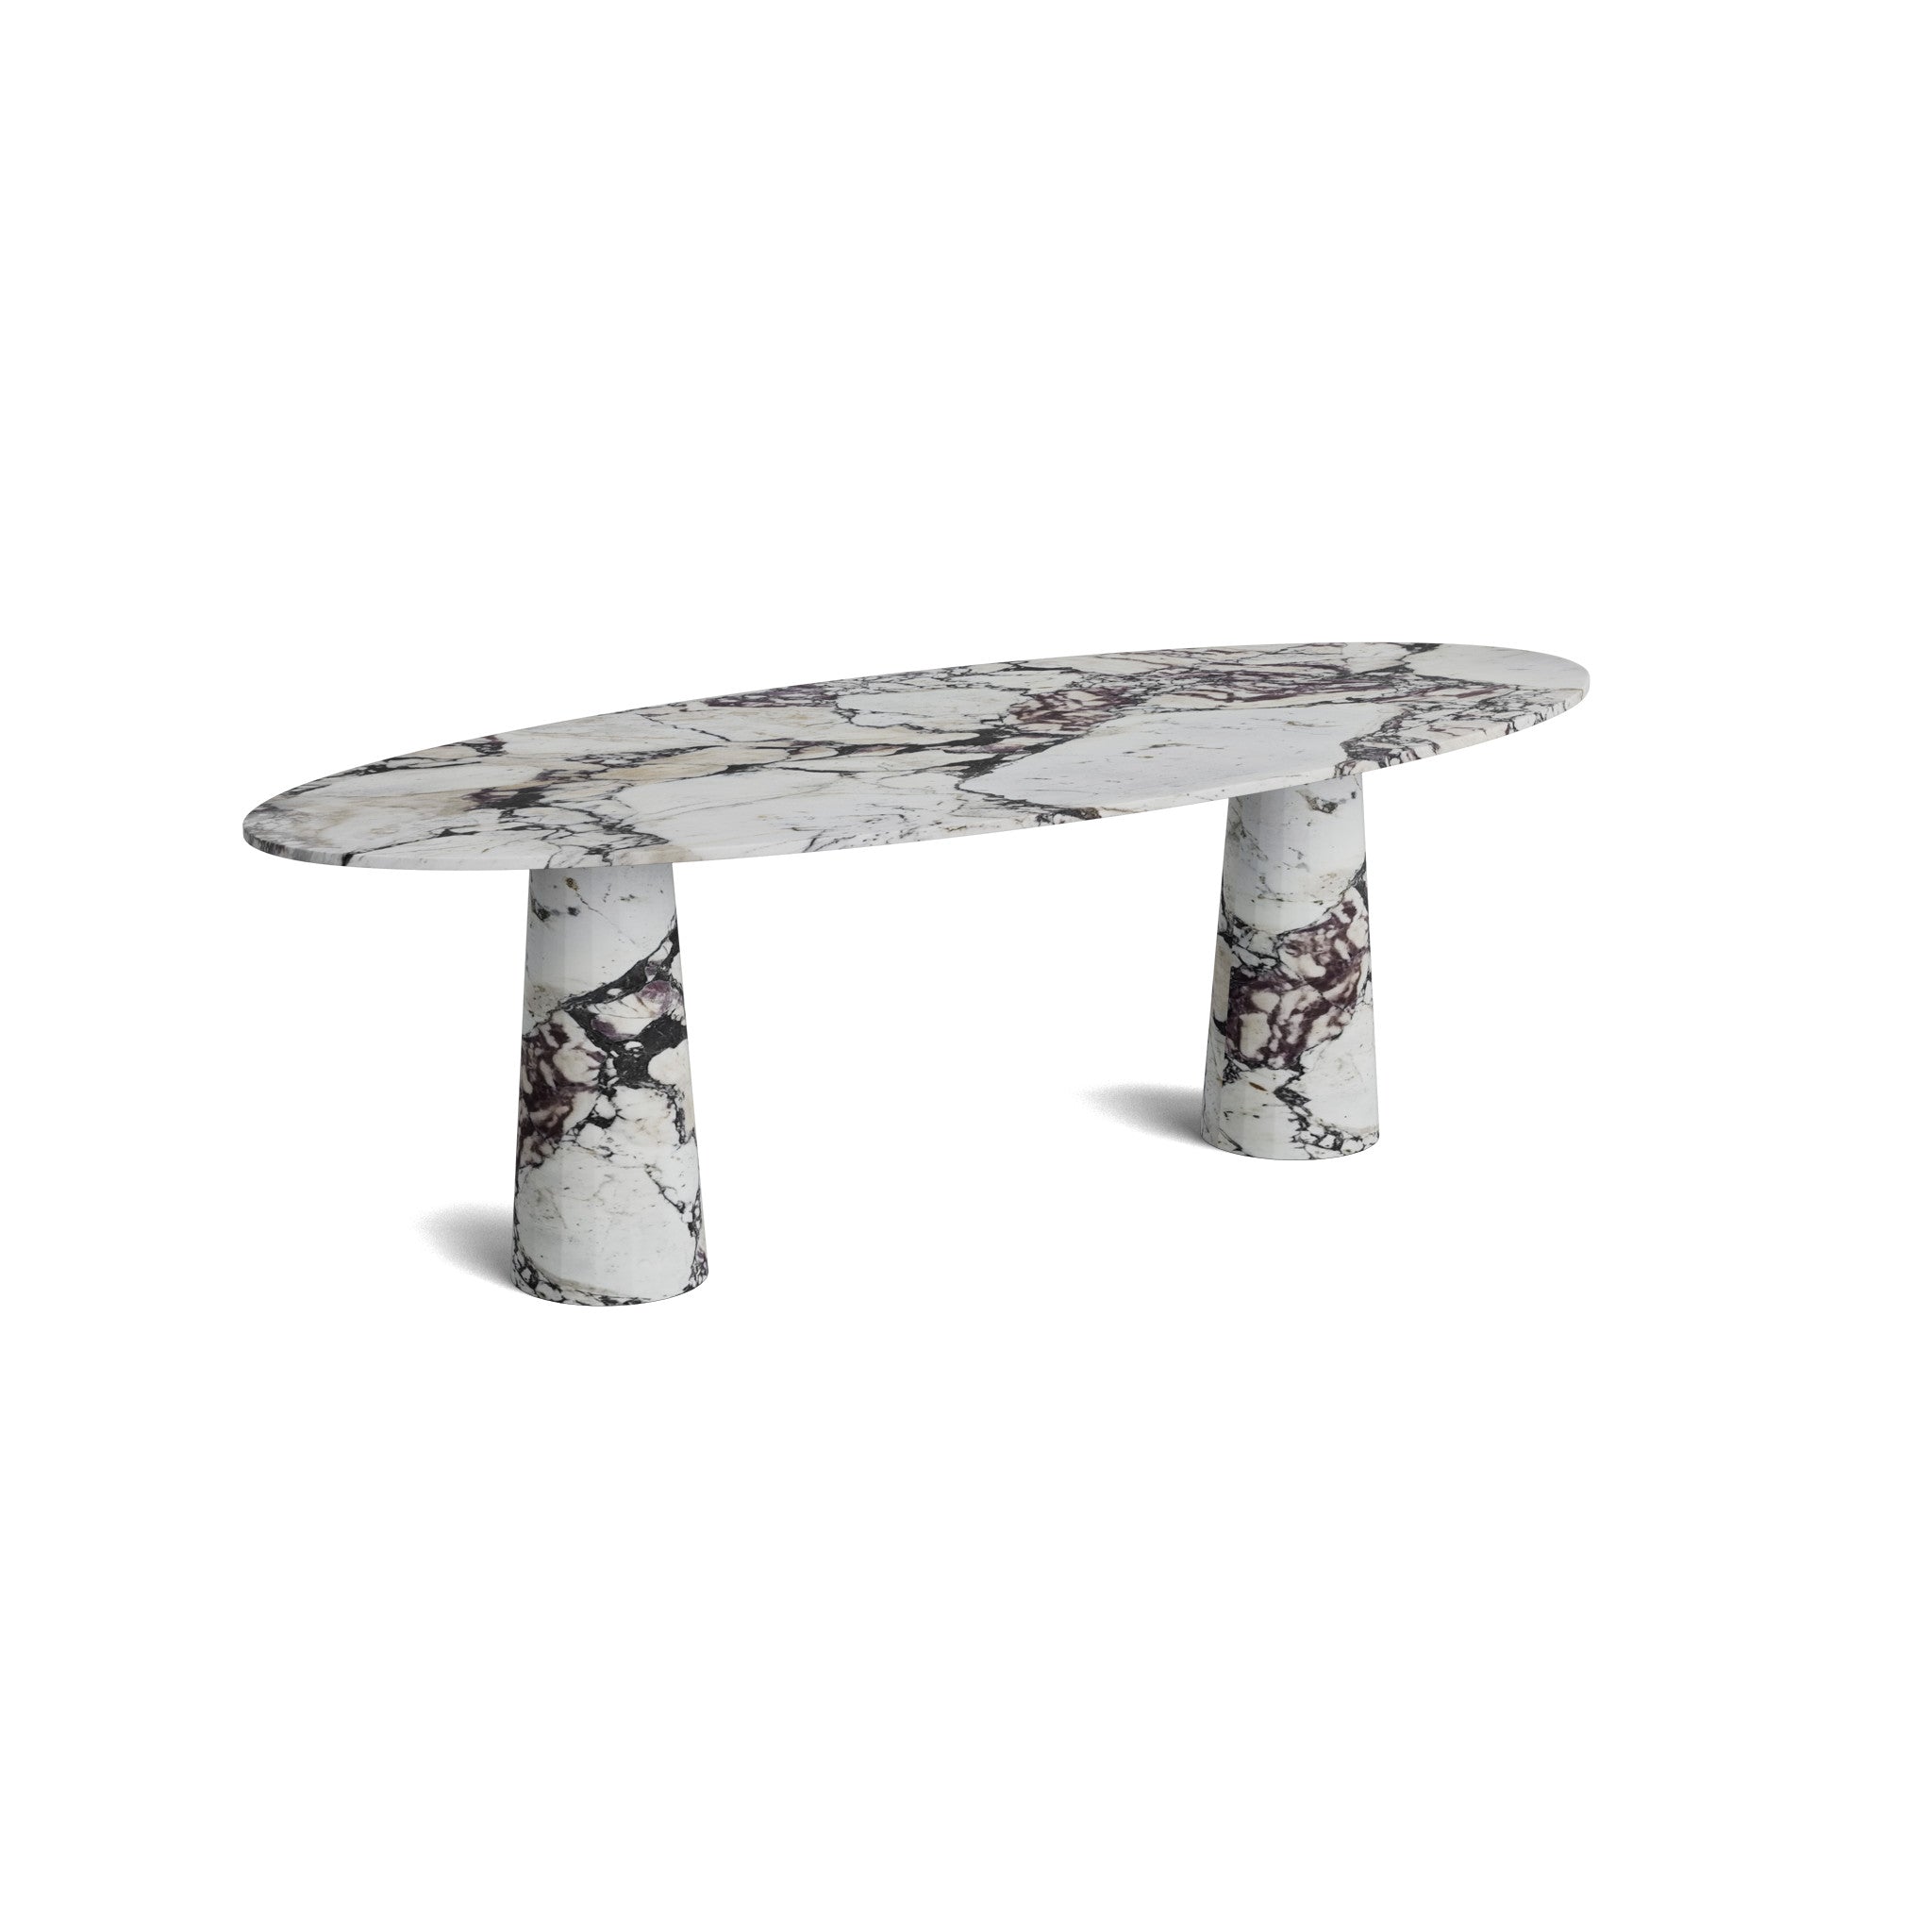 Marble oval dining table - Calacatta Viola - Pebble - Honed